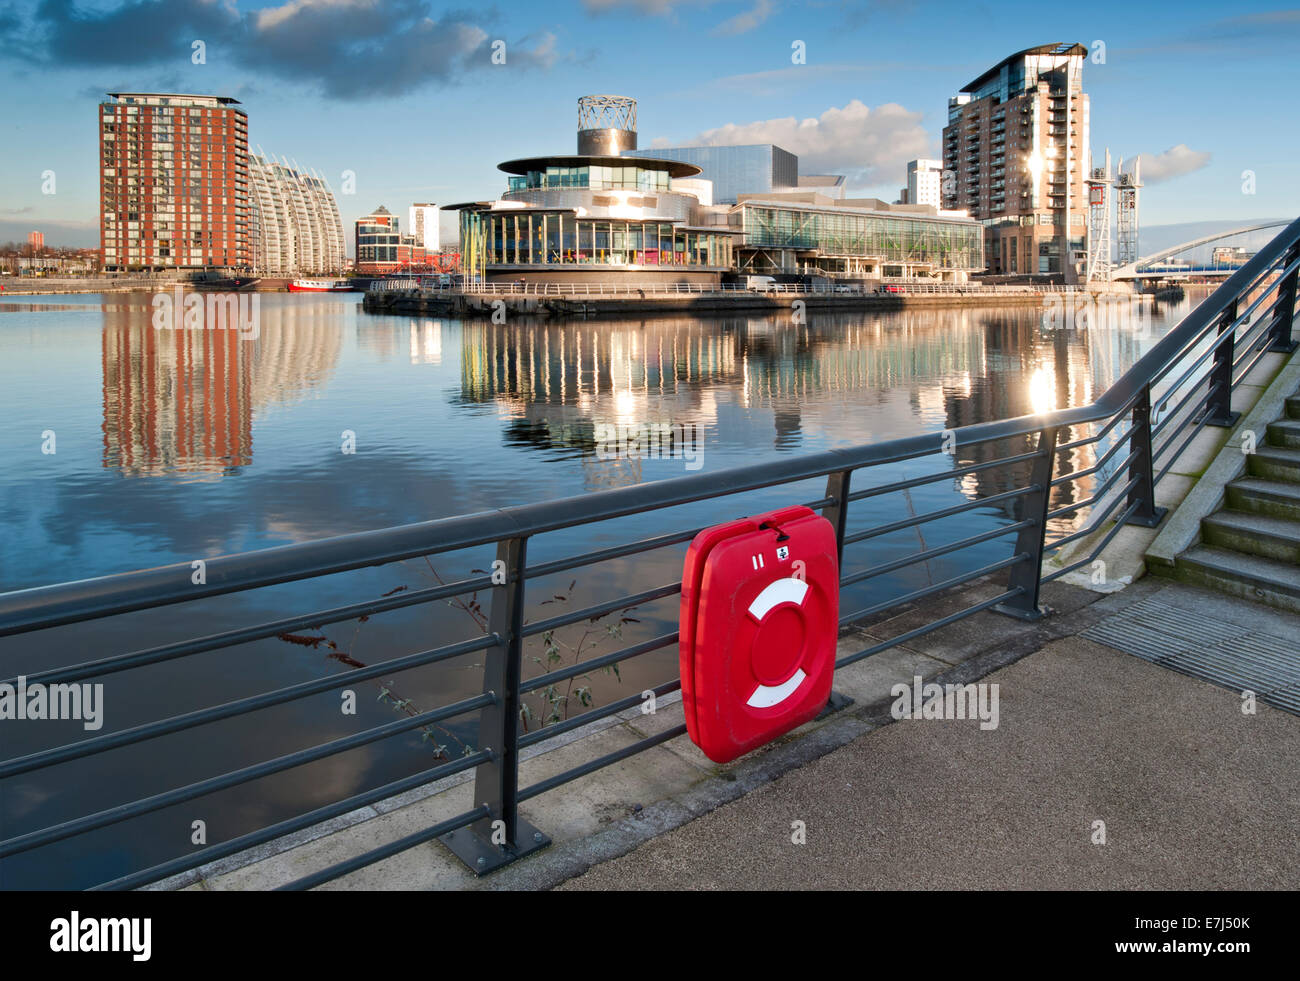 The Lowry Centre and Apartment Buildings at Salford Quays, salford Quays, Greater Manchester, England, UK Stock Photo